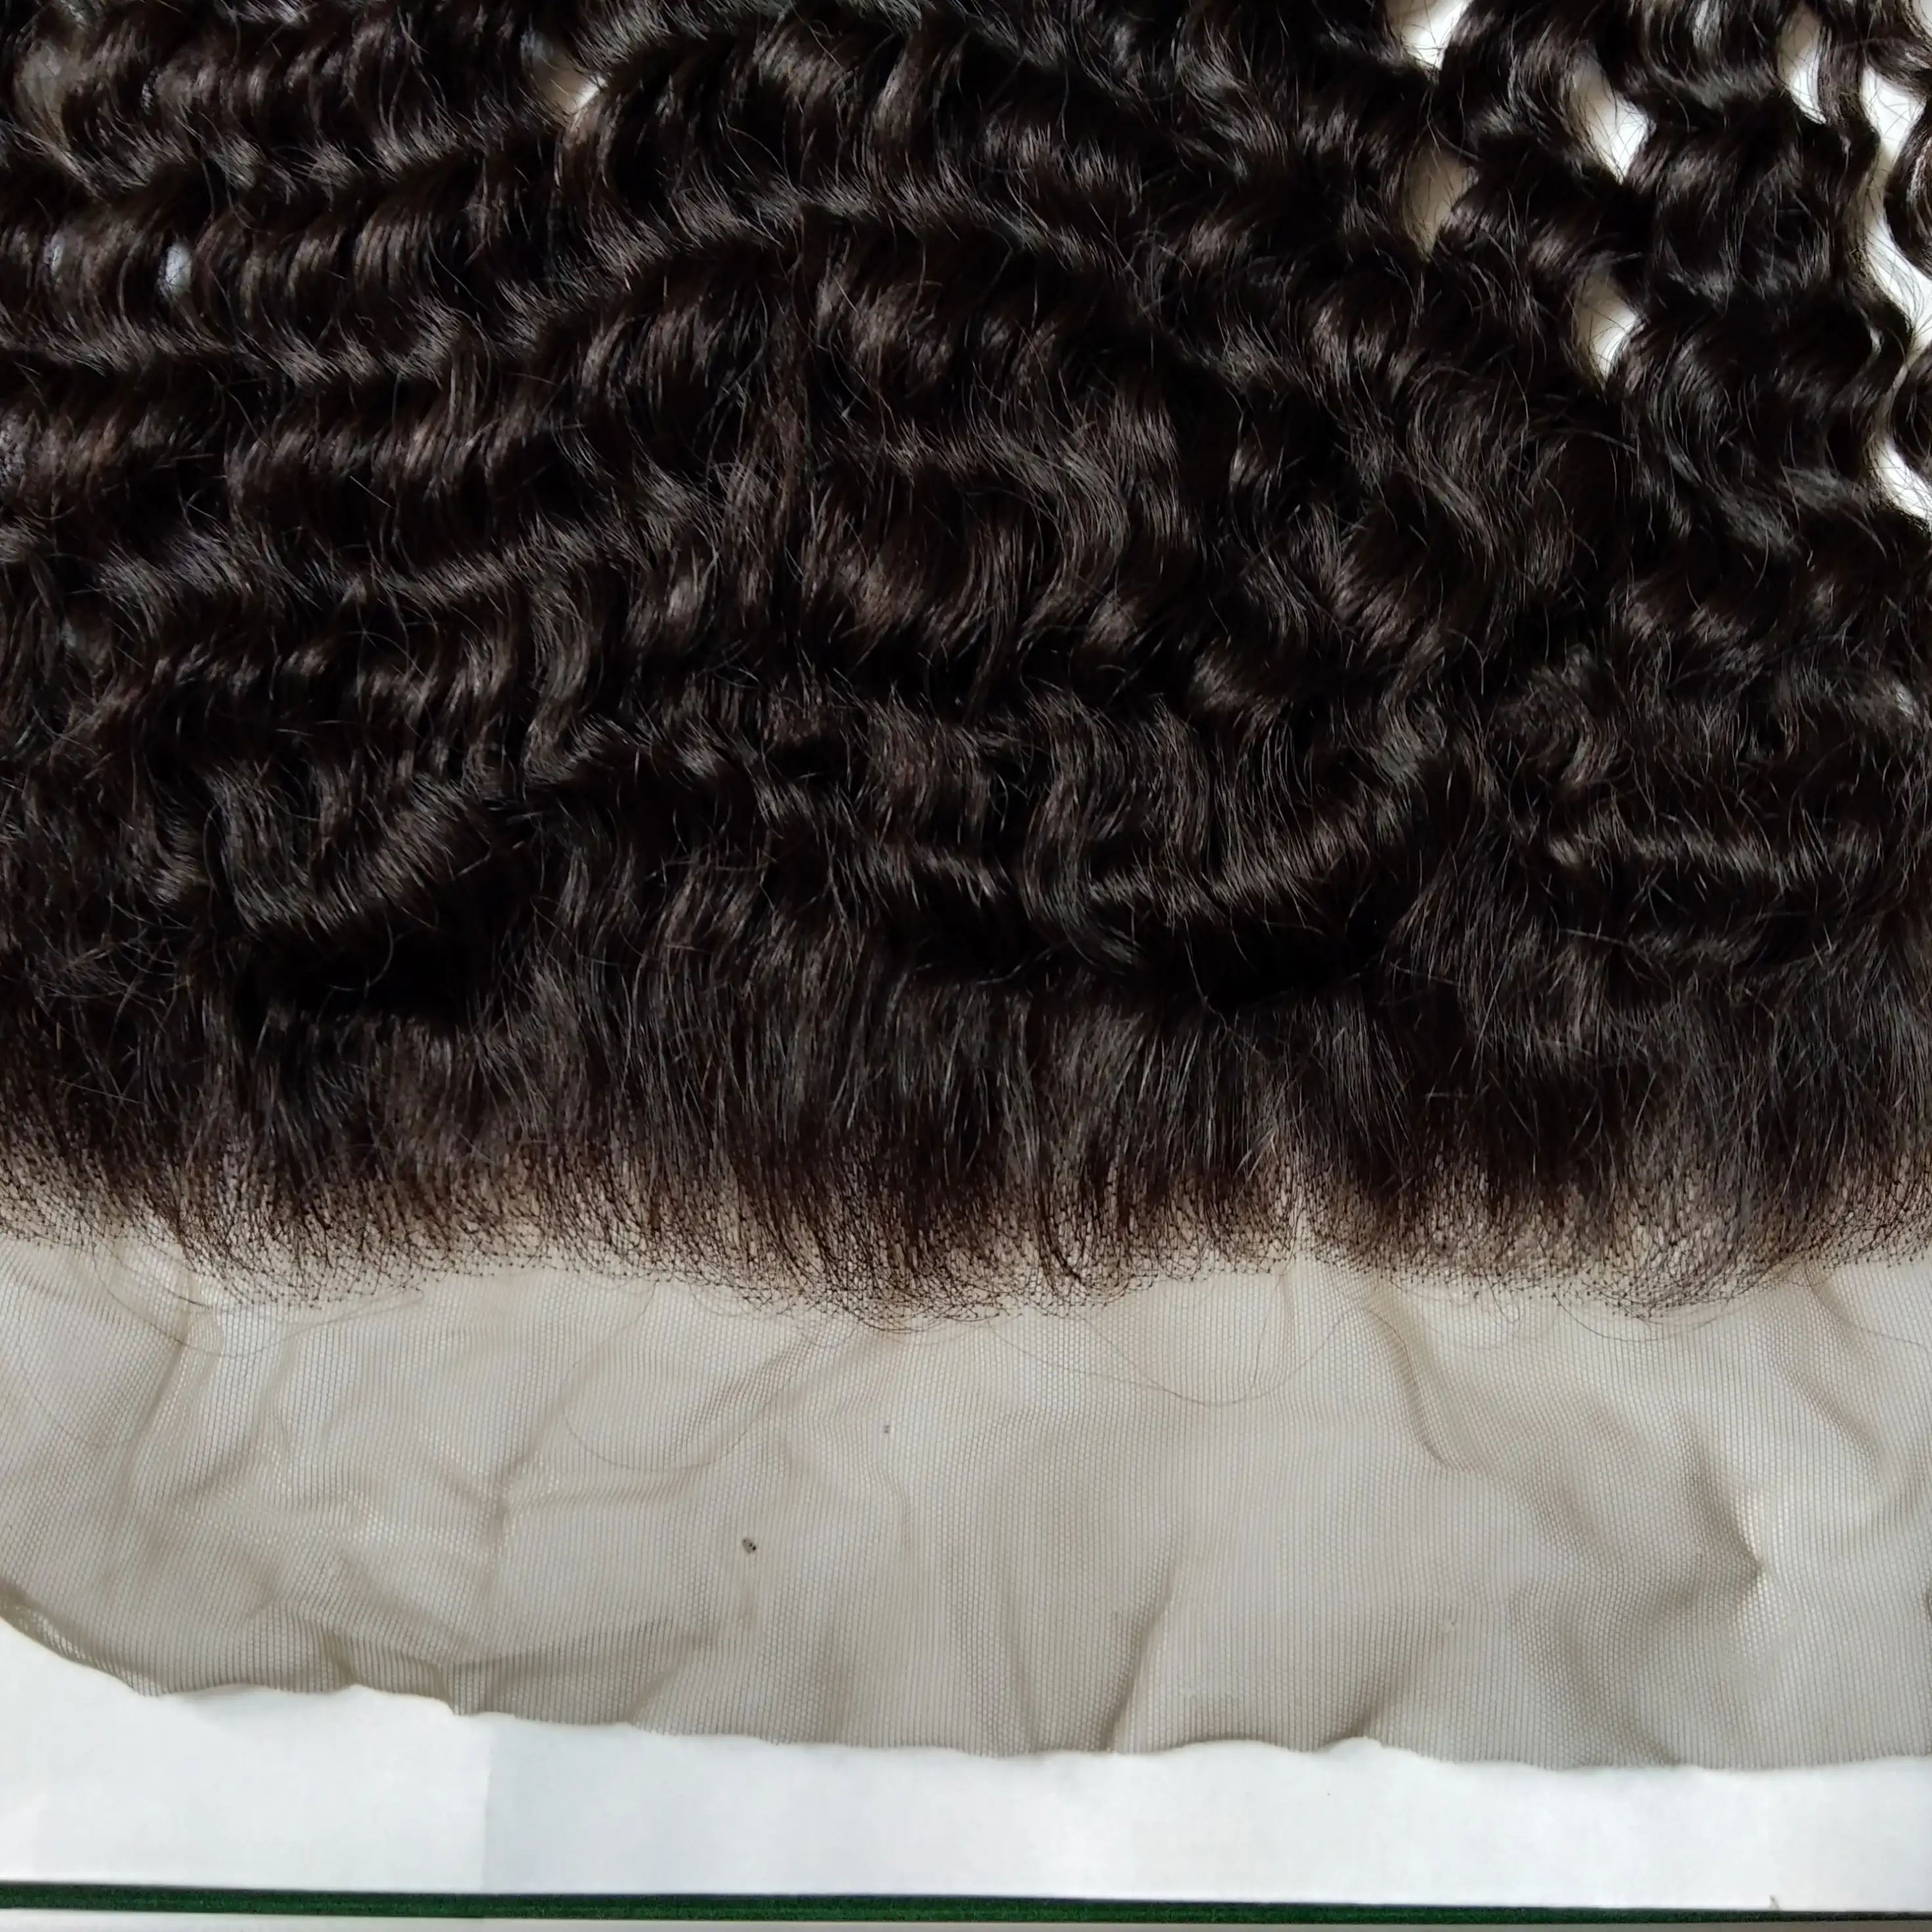 Lace front closure piece, Sample hair bundles with frontal, Indian curly hair extension bundles with closure